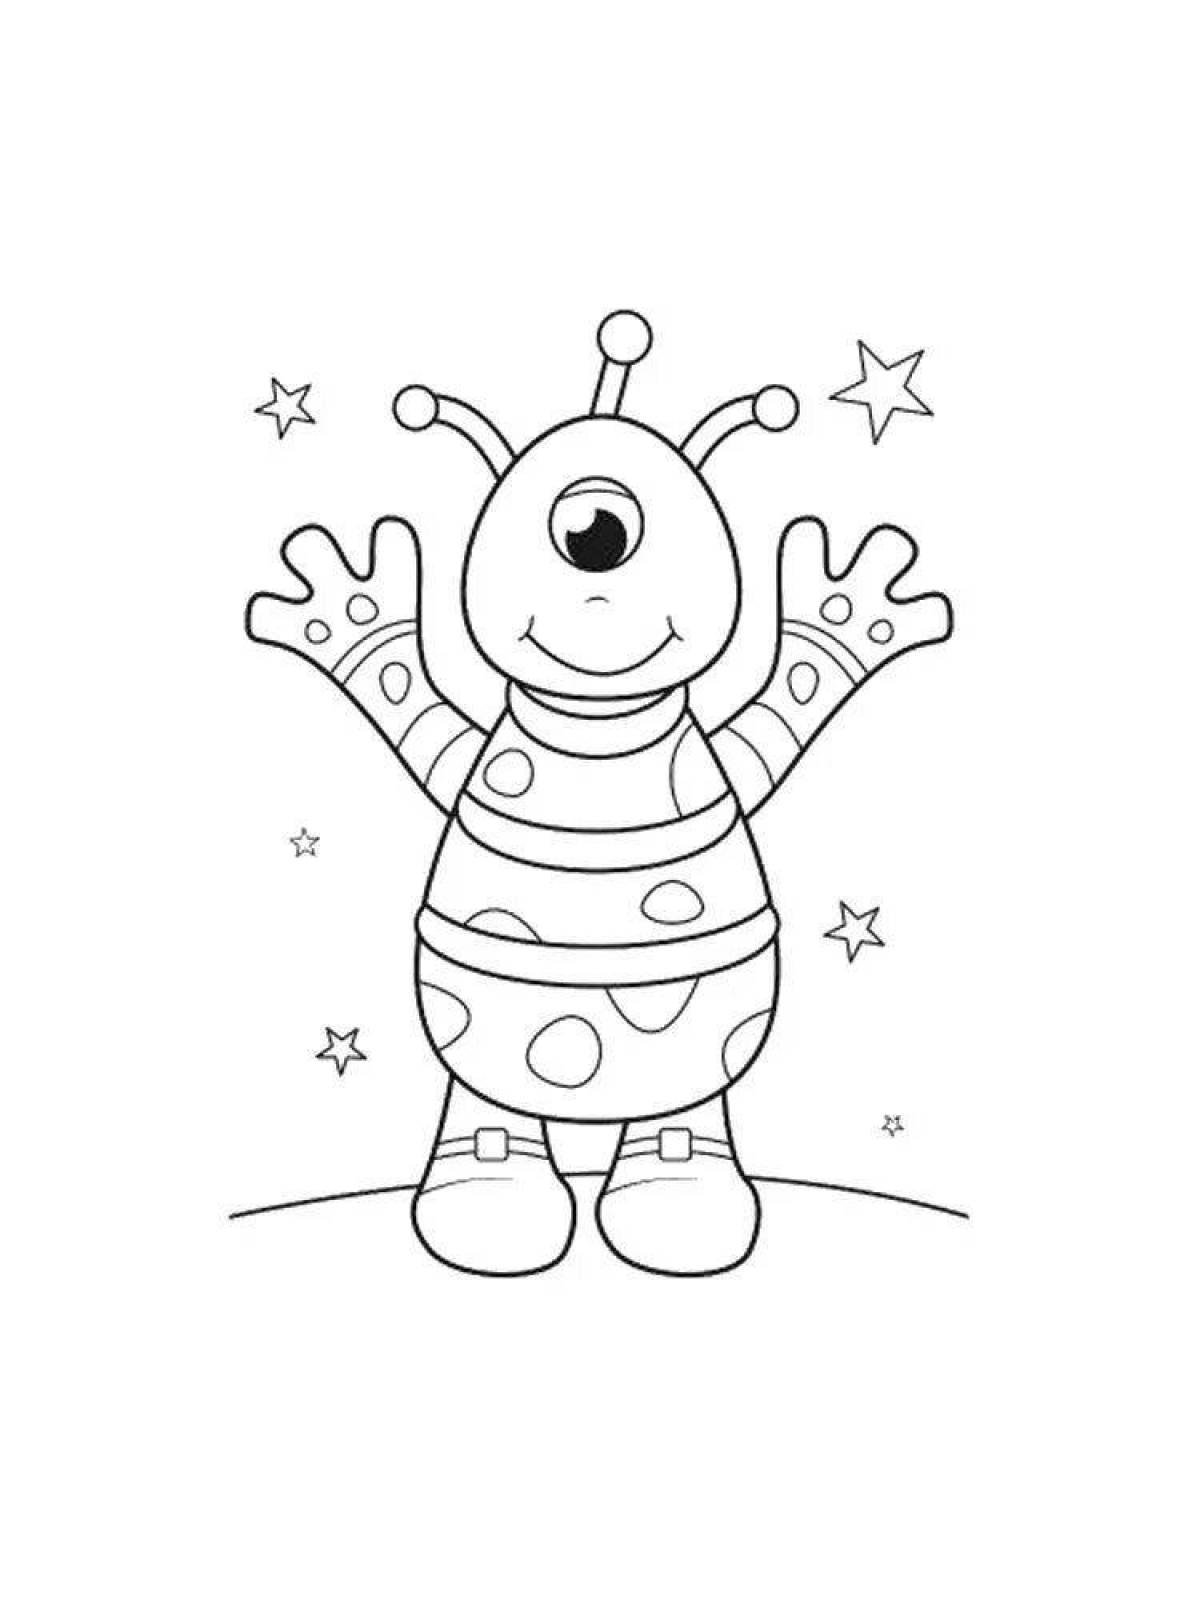 Crazy alien coloring pages for kids